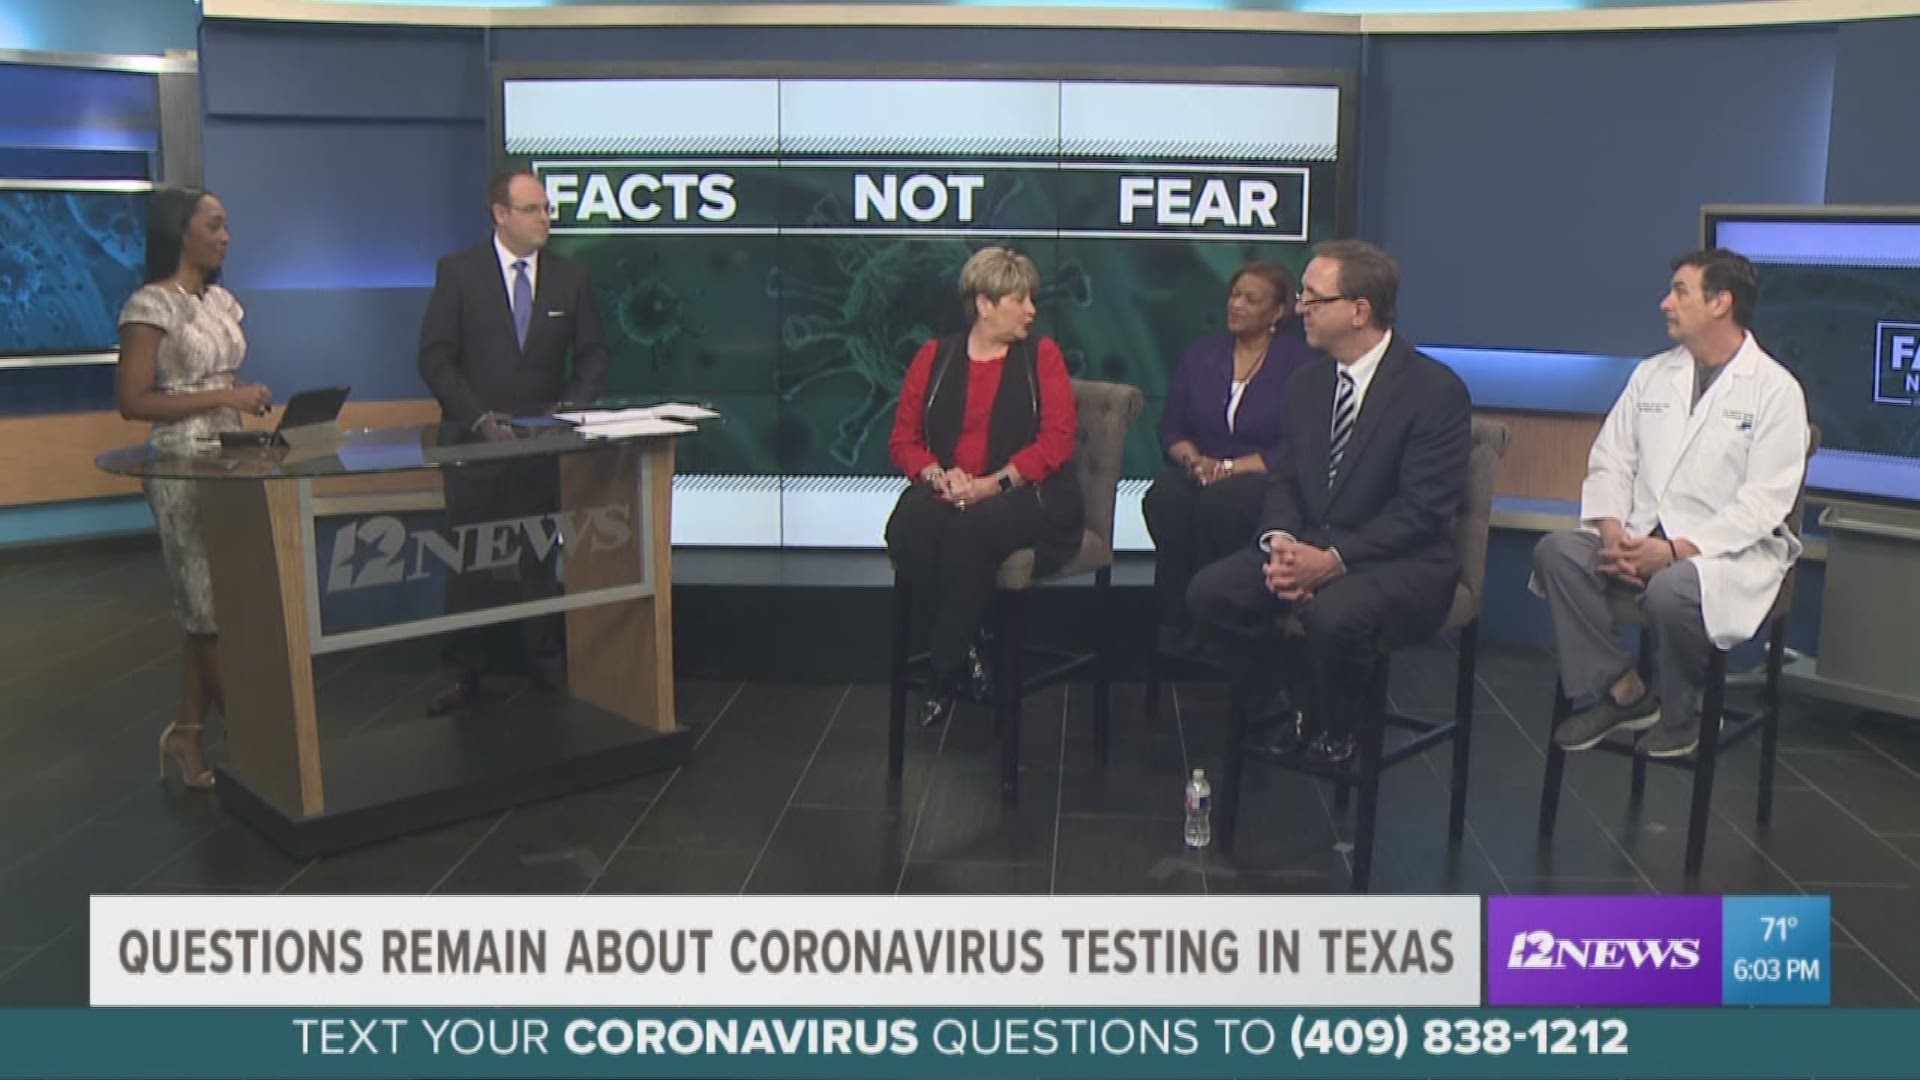 Southeast Texas officials talk about the current COVID19 testing process during the 12News #FactsNotFear Town Hall.